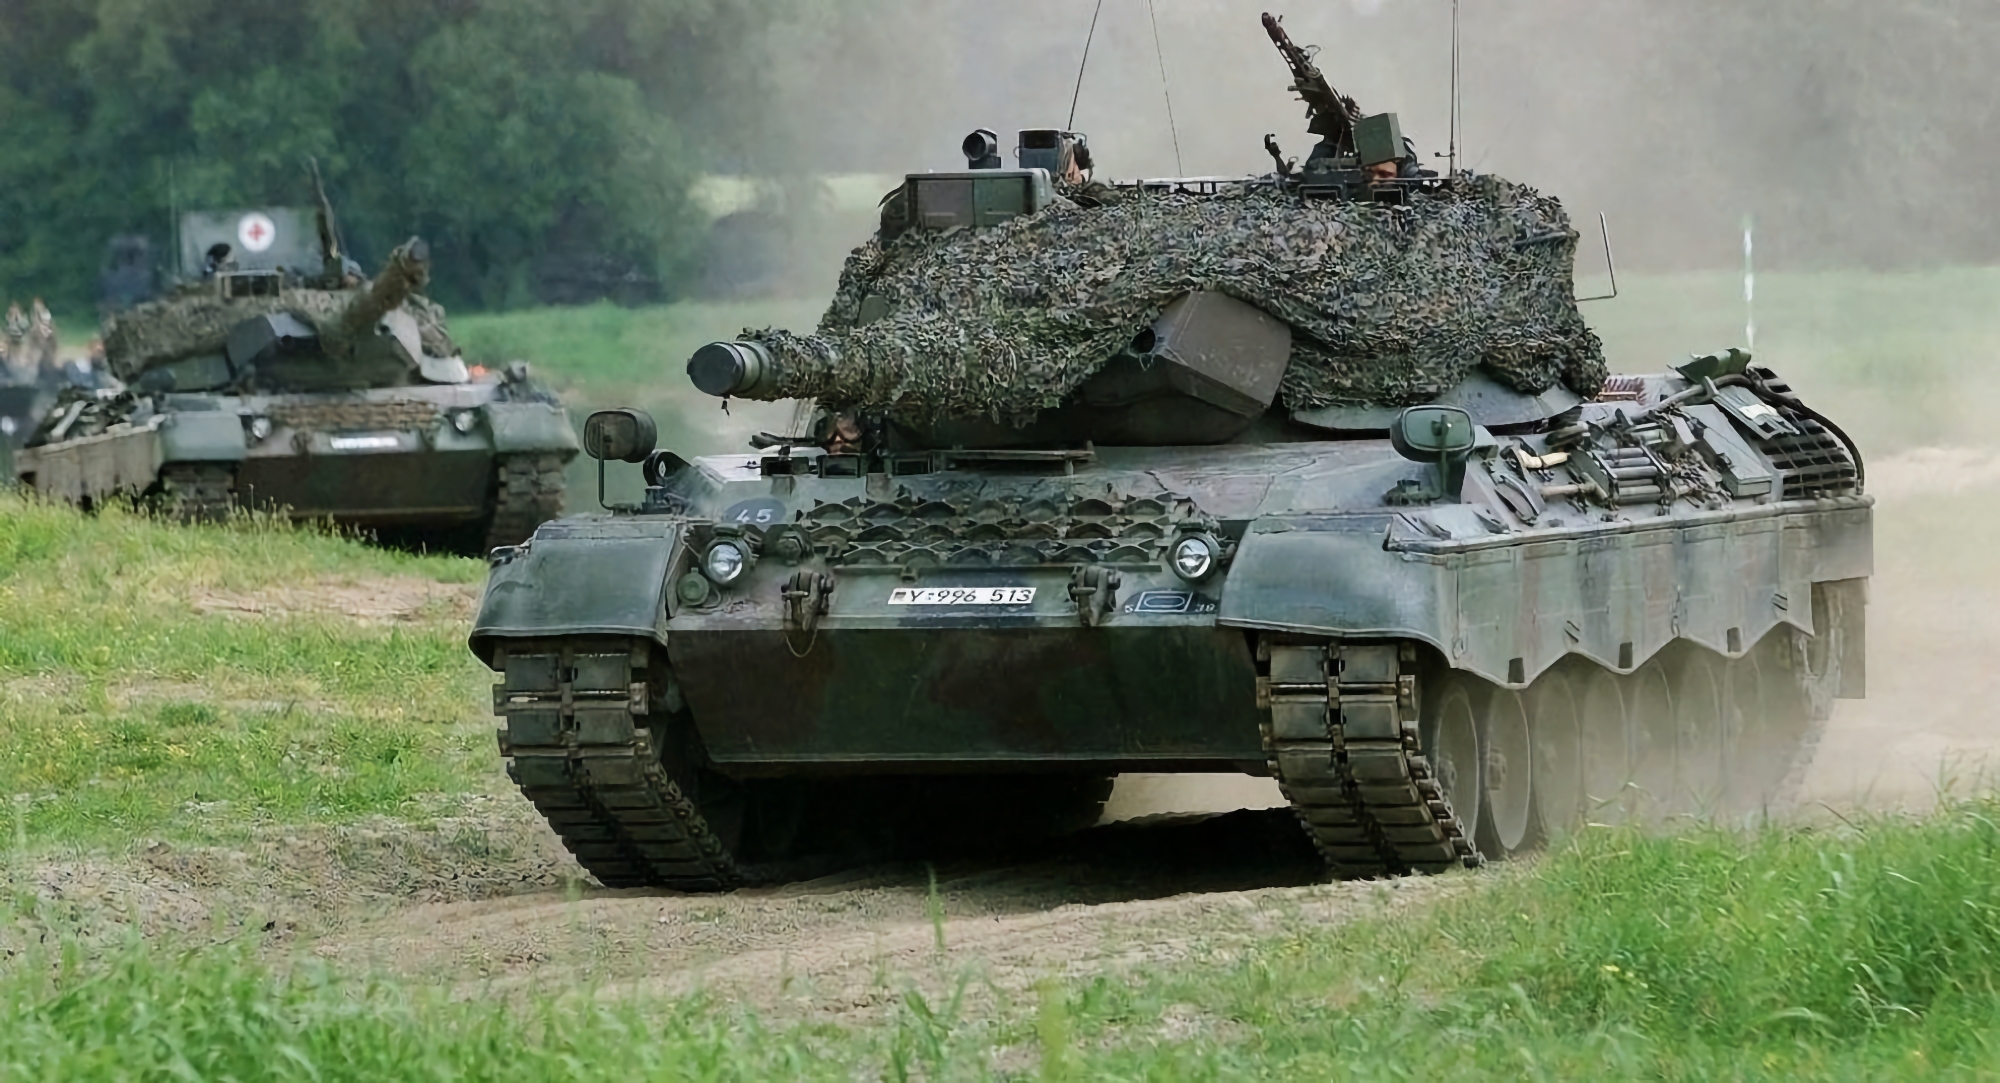 Leopard 1A5DK tanks have already arrived in Ukraine